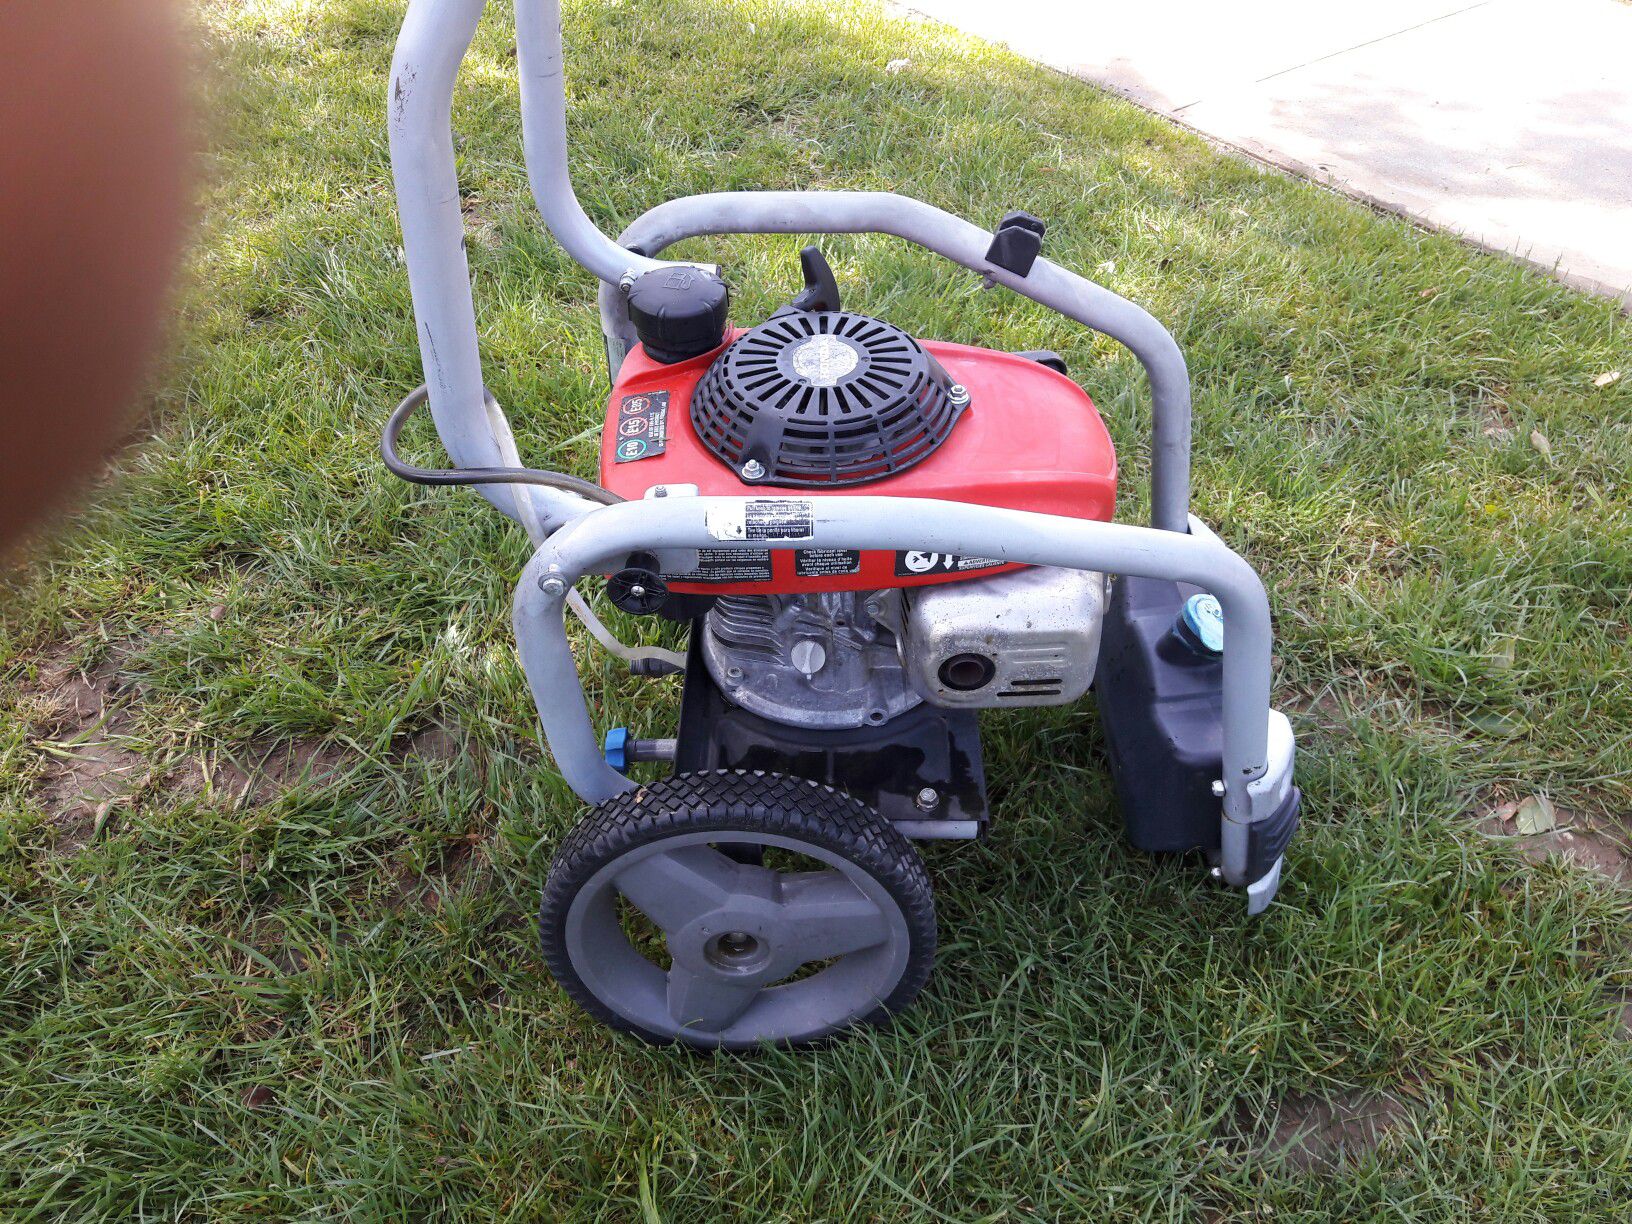 HomeLite 3100 psi 2.6 gpm. power washer